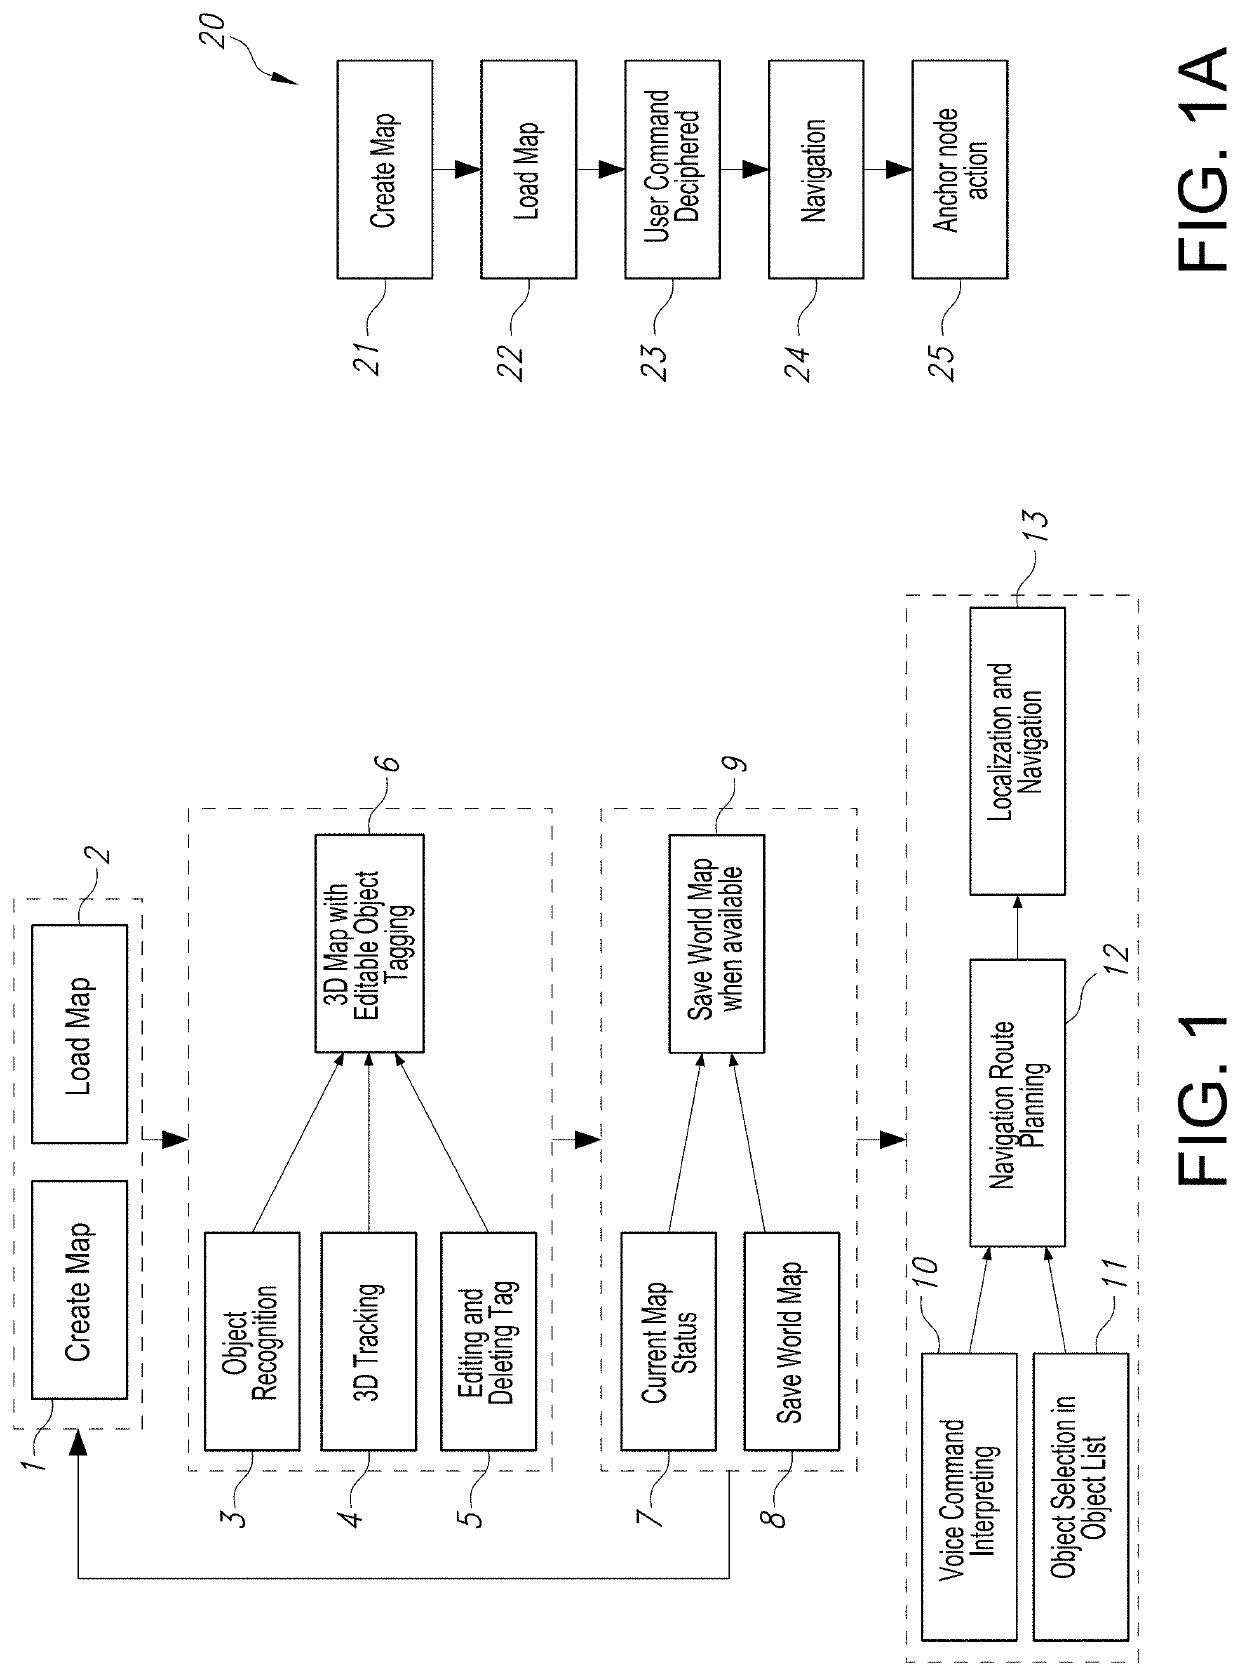 System and Method Associated with Expedient Determination of Location of One or More Object(s) Within a Bounded Perimeter of 3D Space Based on Mapping and Navigation to a Precise POI Destination Using a Smart Laser Pointer Device